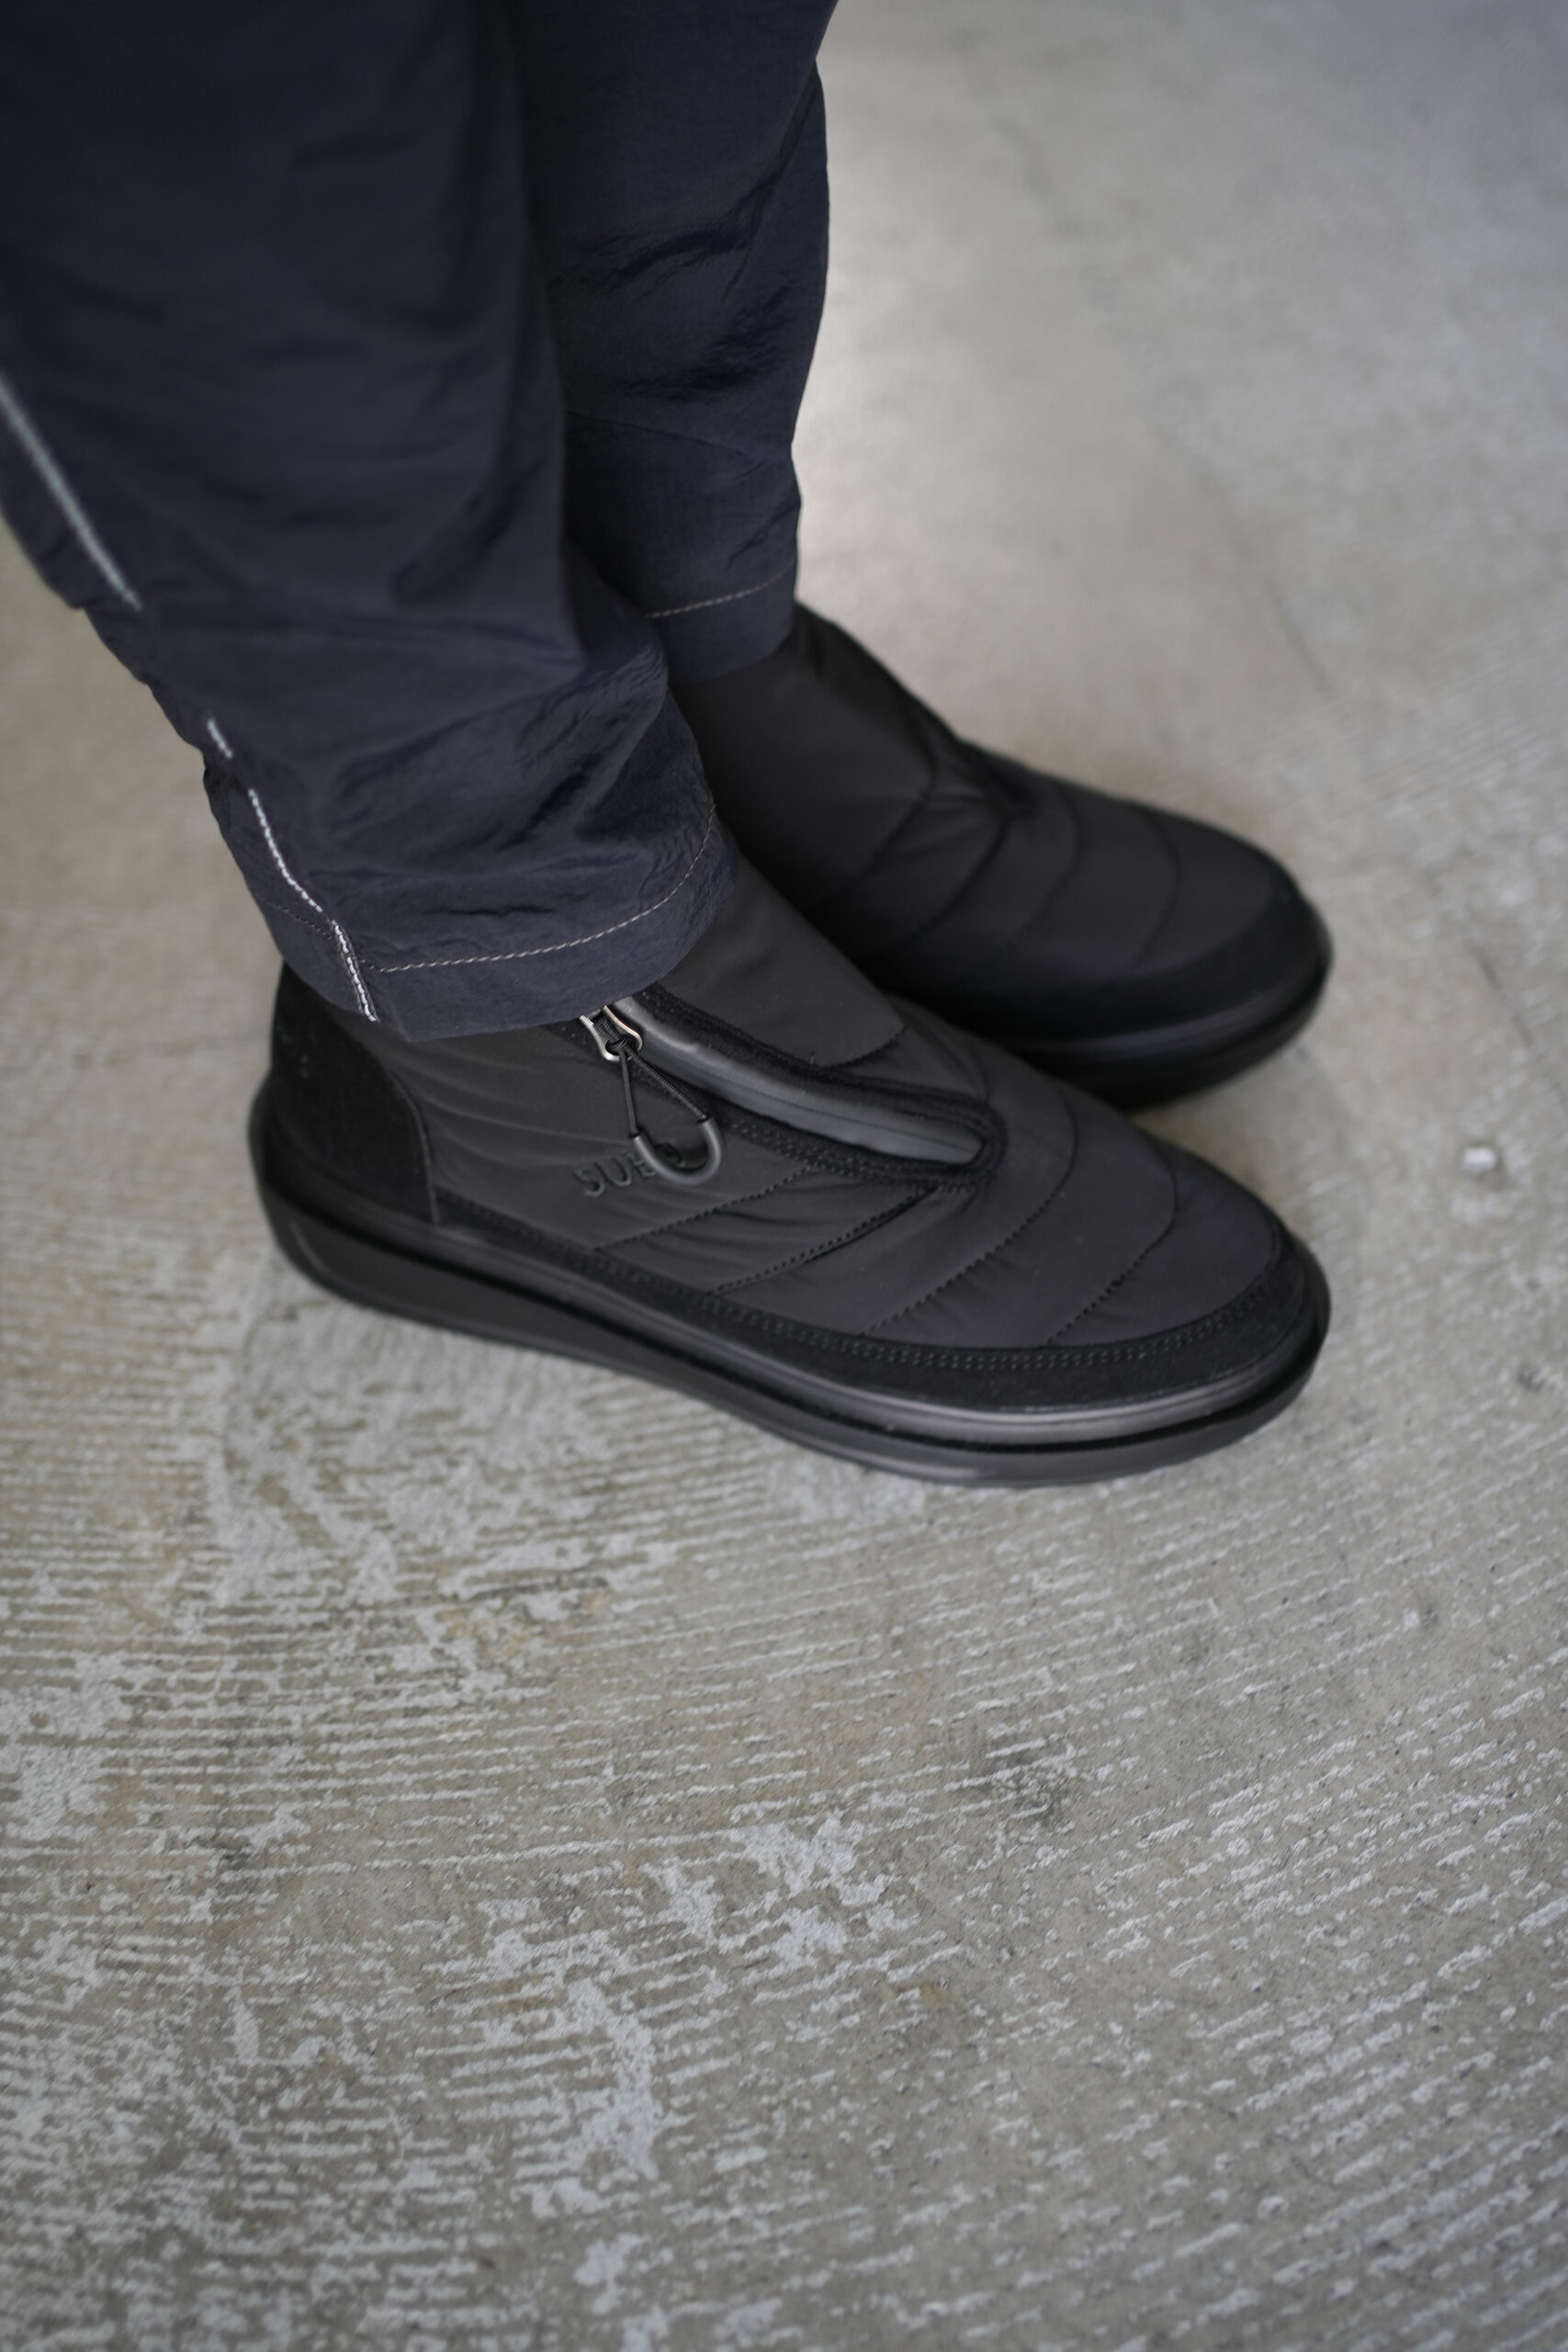 WMBC x SUBU ZIP UP BOOTS | ANOTHER LOUNGE